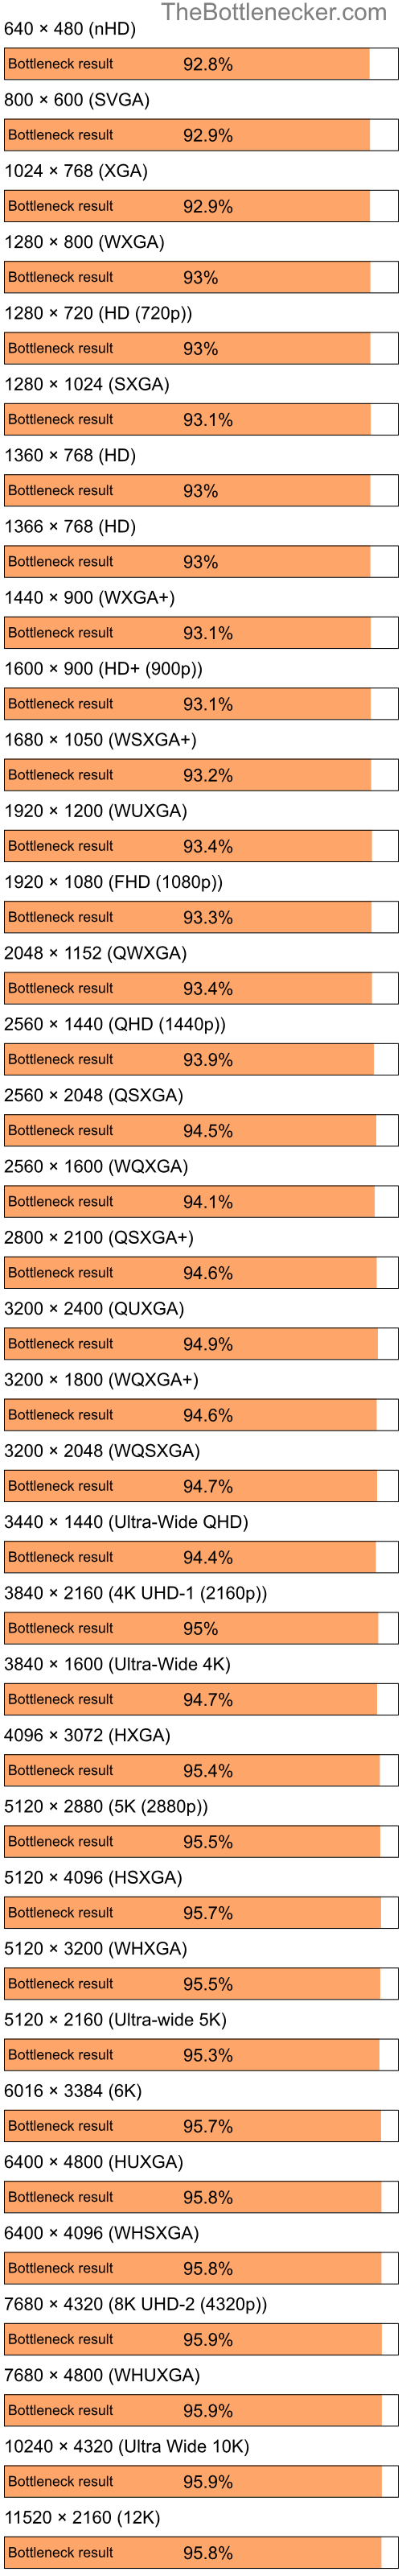 Bottleneck results by resolution for Intel Pentium 4 and AMD Radeon 9250 in Graphic Card Intense Tasks